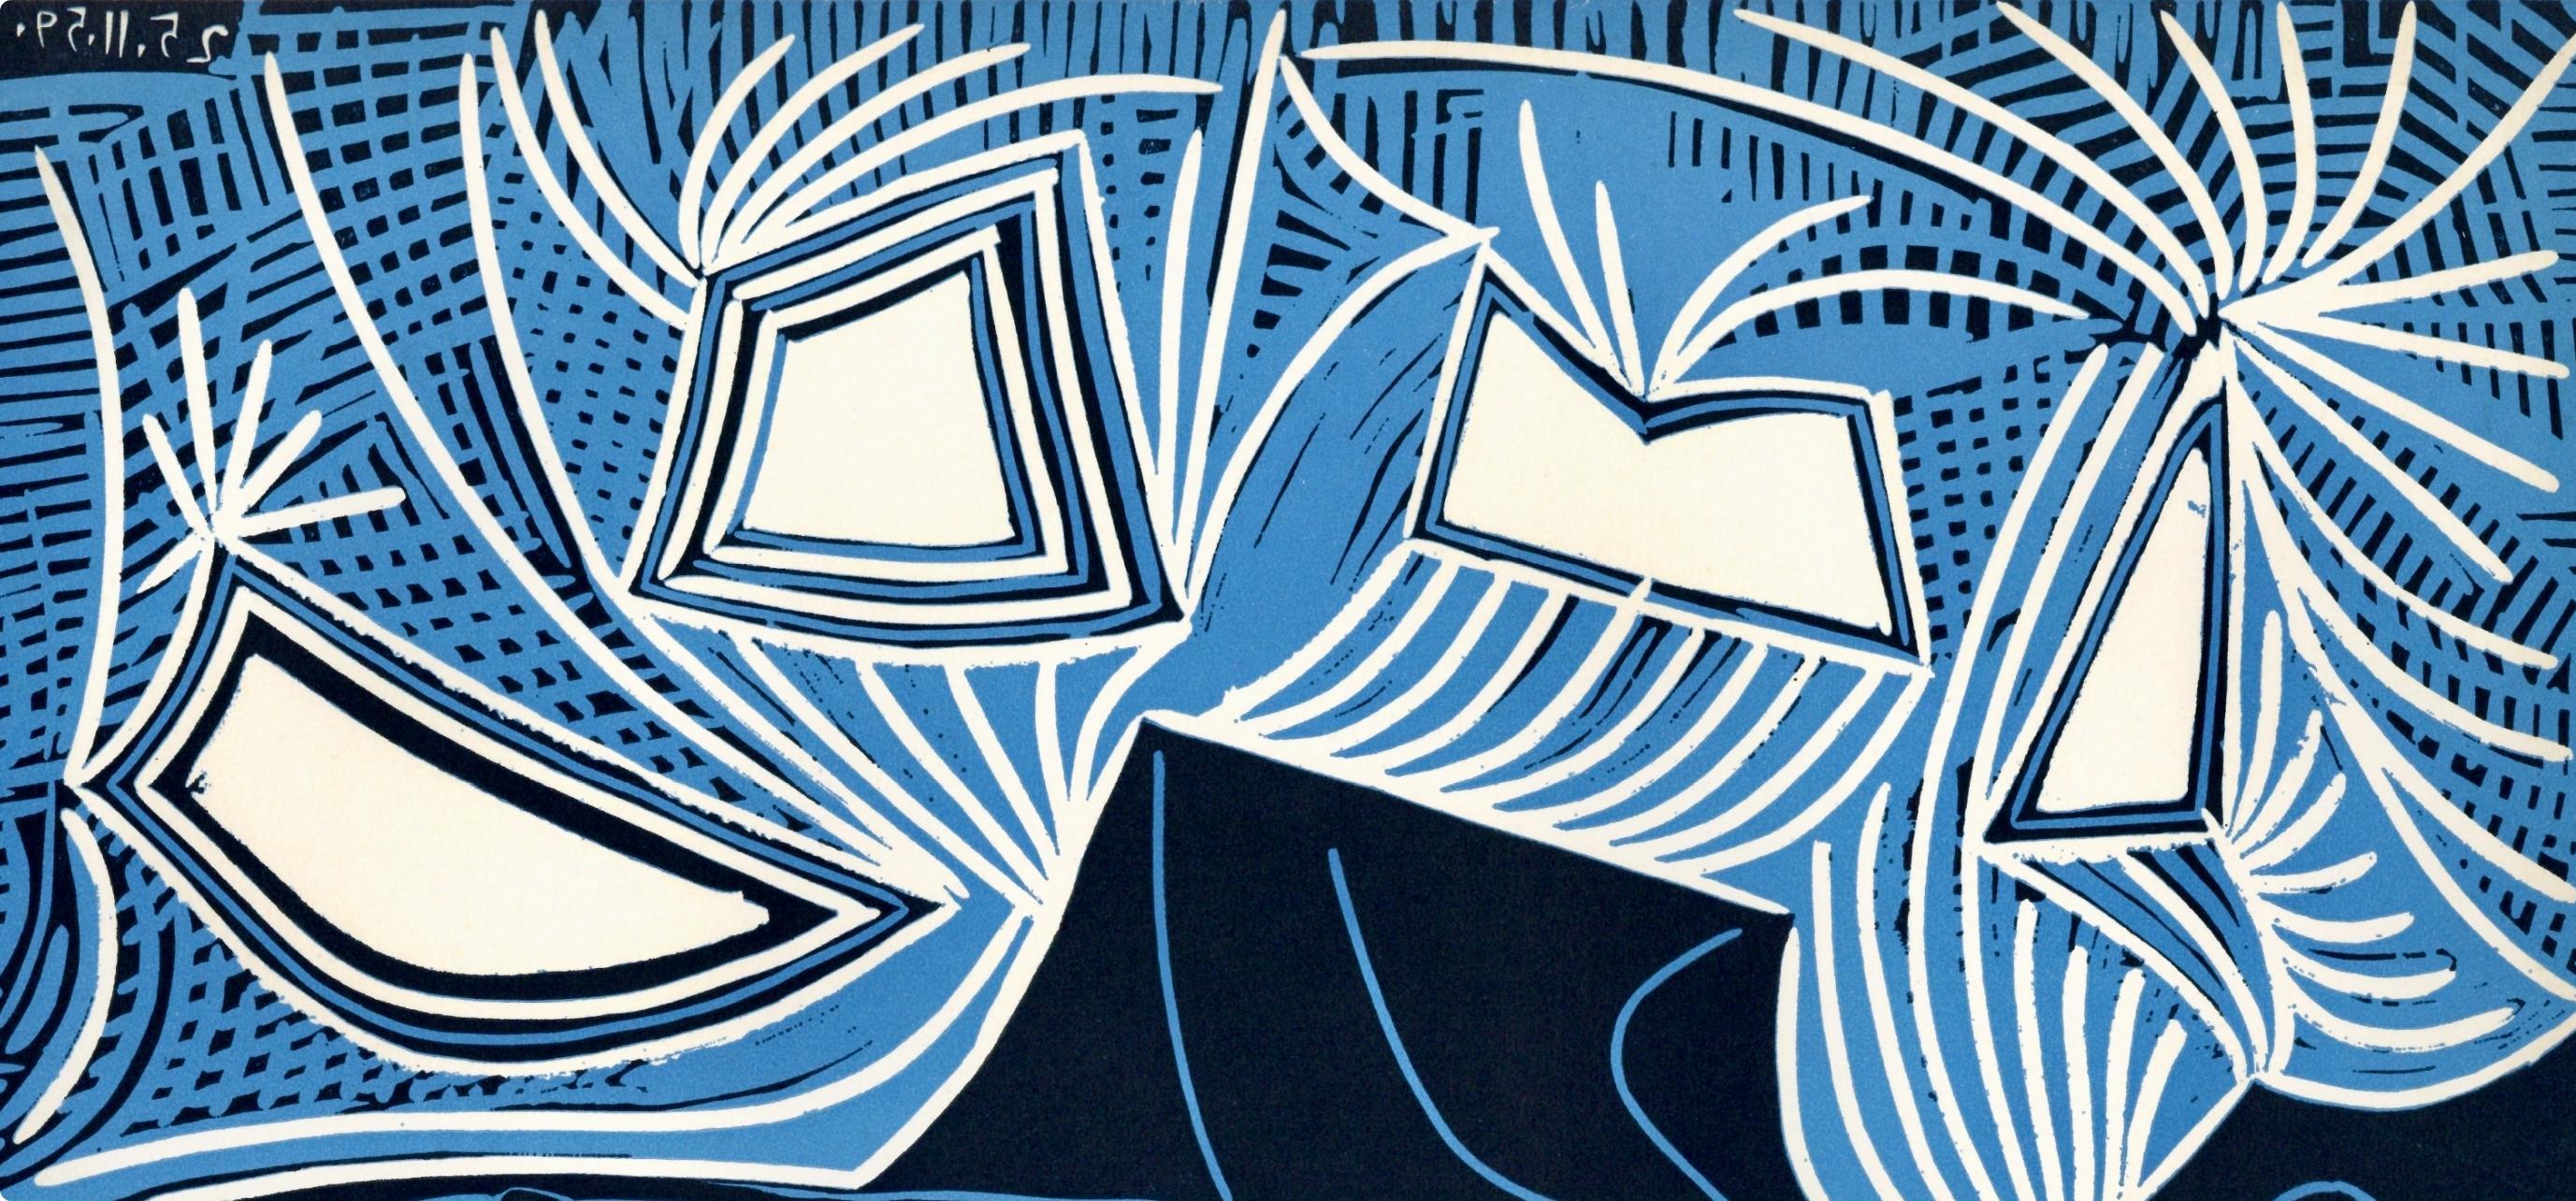 Linocut on archival paper. Unsigned and unnumbered, as issued. Good condition. Notes: From the volume, Pablo Picasso: Linogravures. Published by France Éditions Cercle d'Art, Paris; printed by Verlag Gerd Hatje, Stuttgart, 1962. Excerpted from the